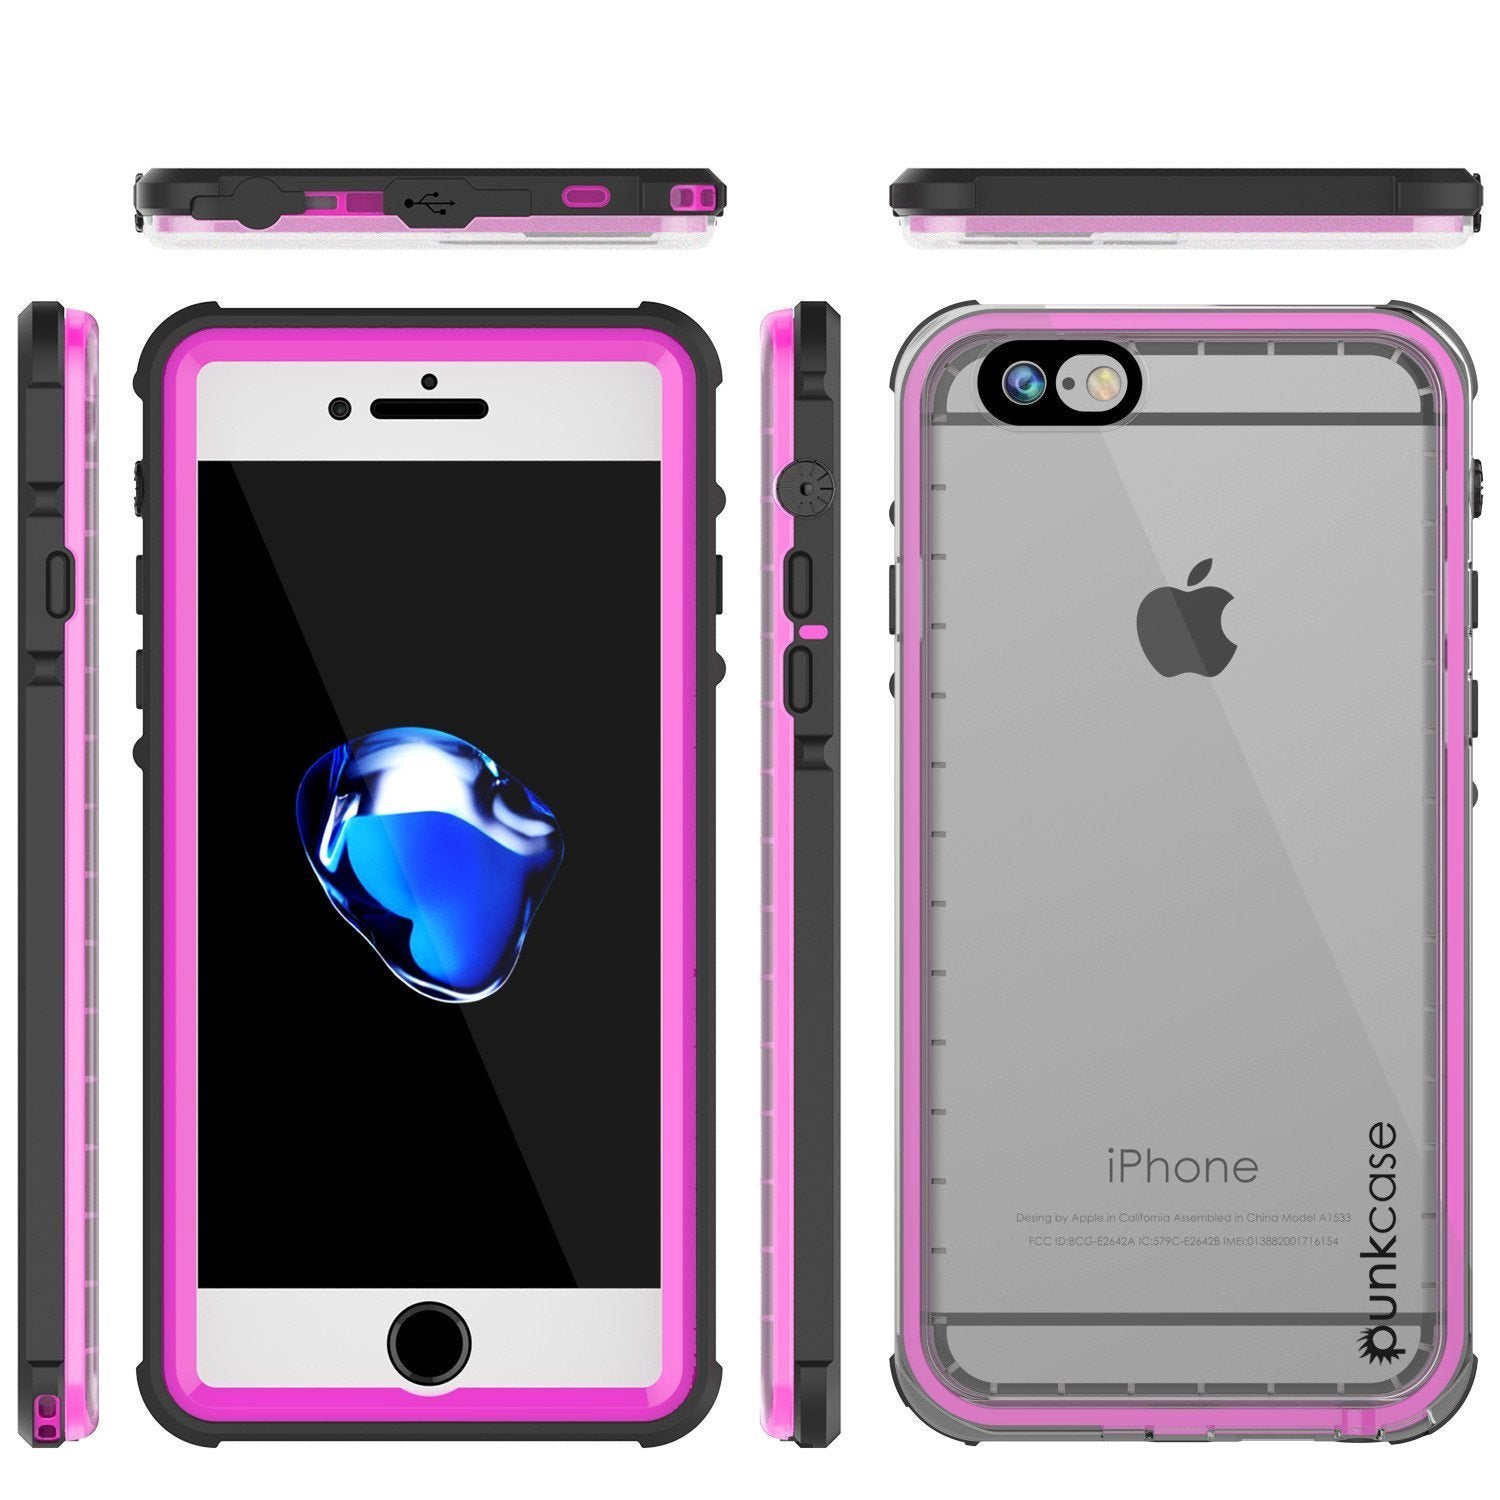 Apple iPhone SE (4.7") Waterproof Case, PUNKcase CRYSTAL Pink W/ Attached Screen Protector  | Warranty